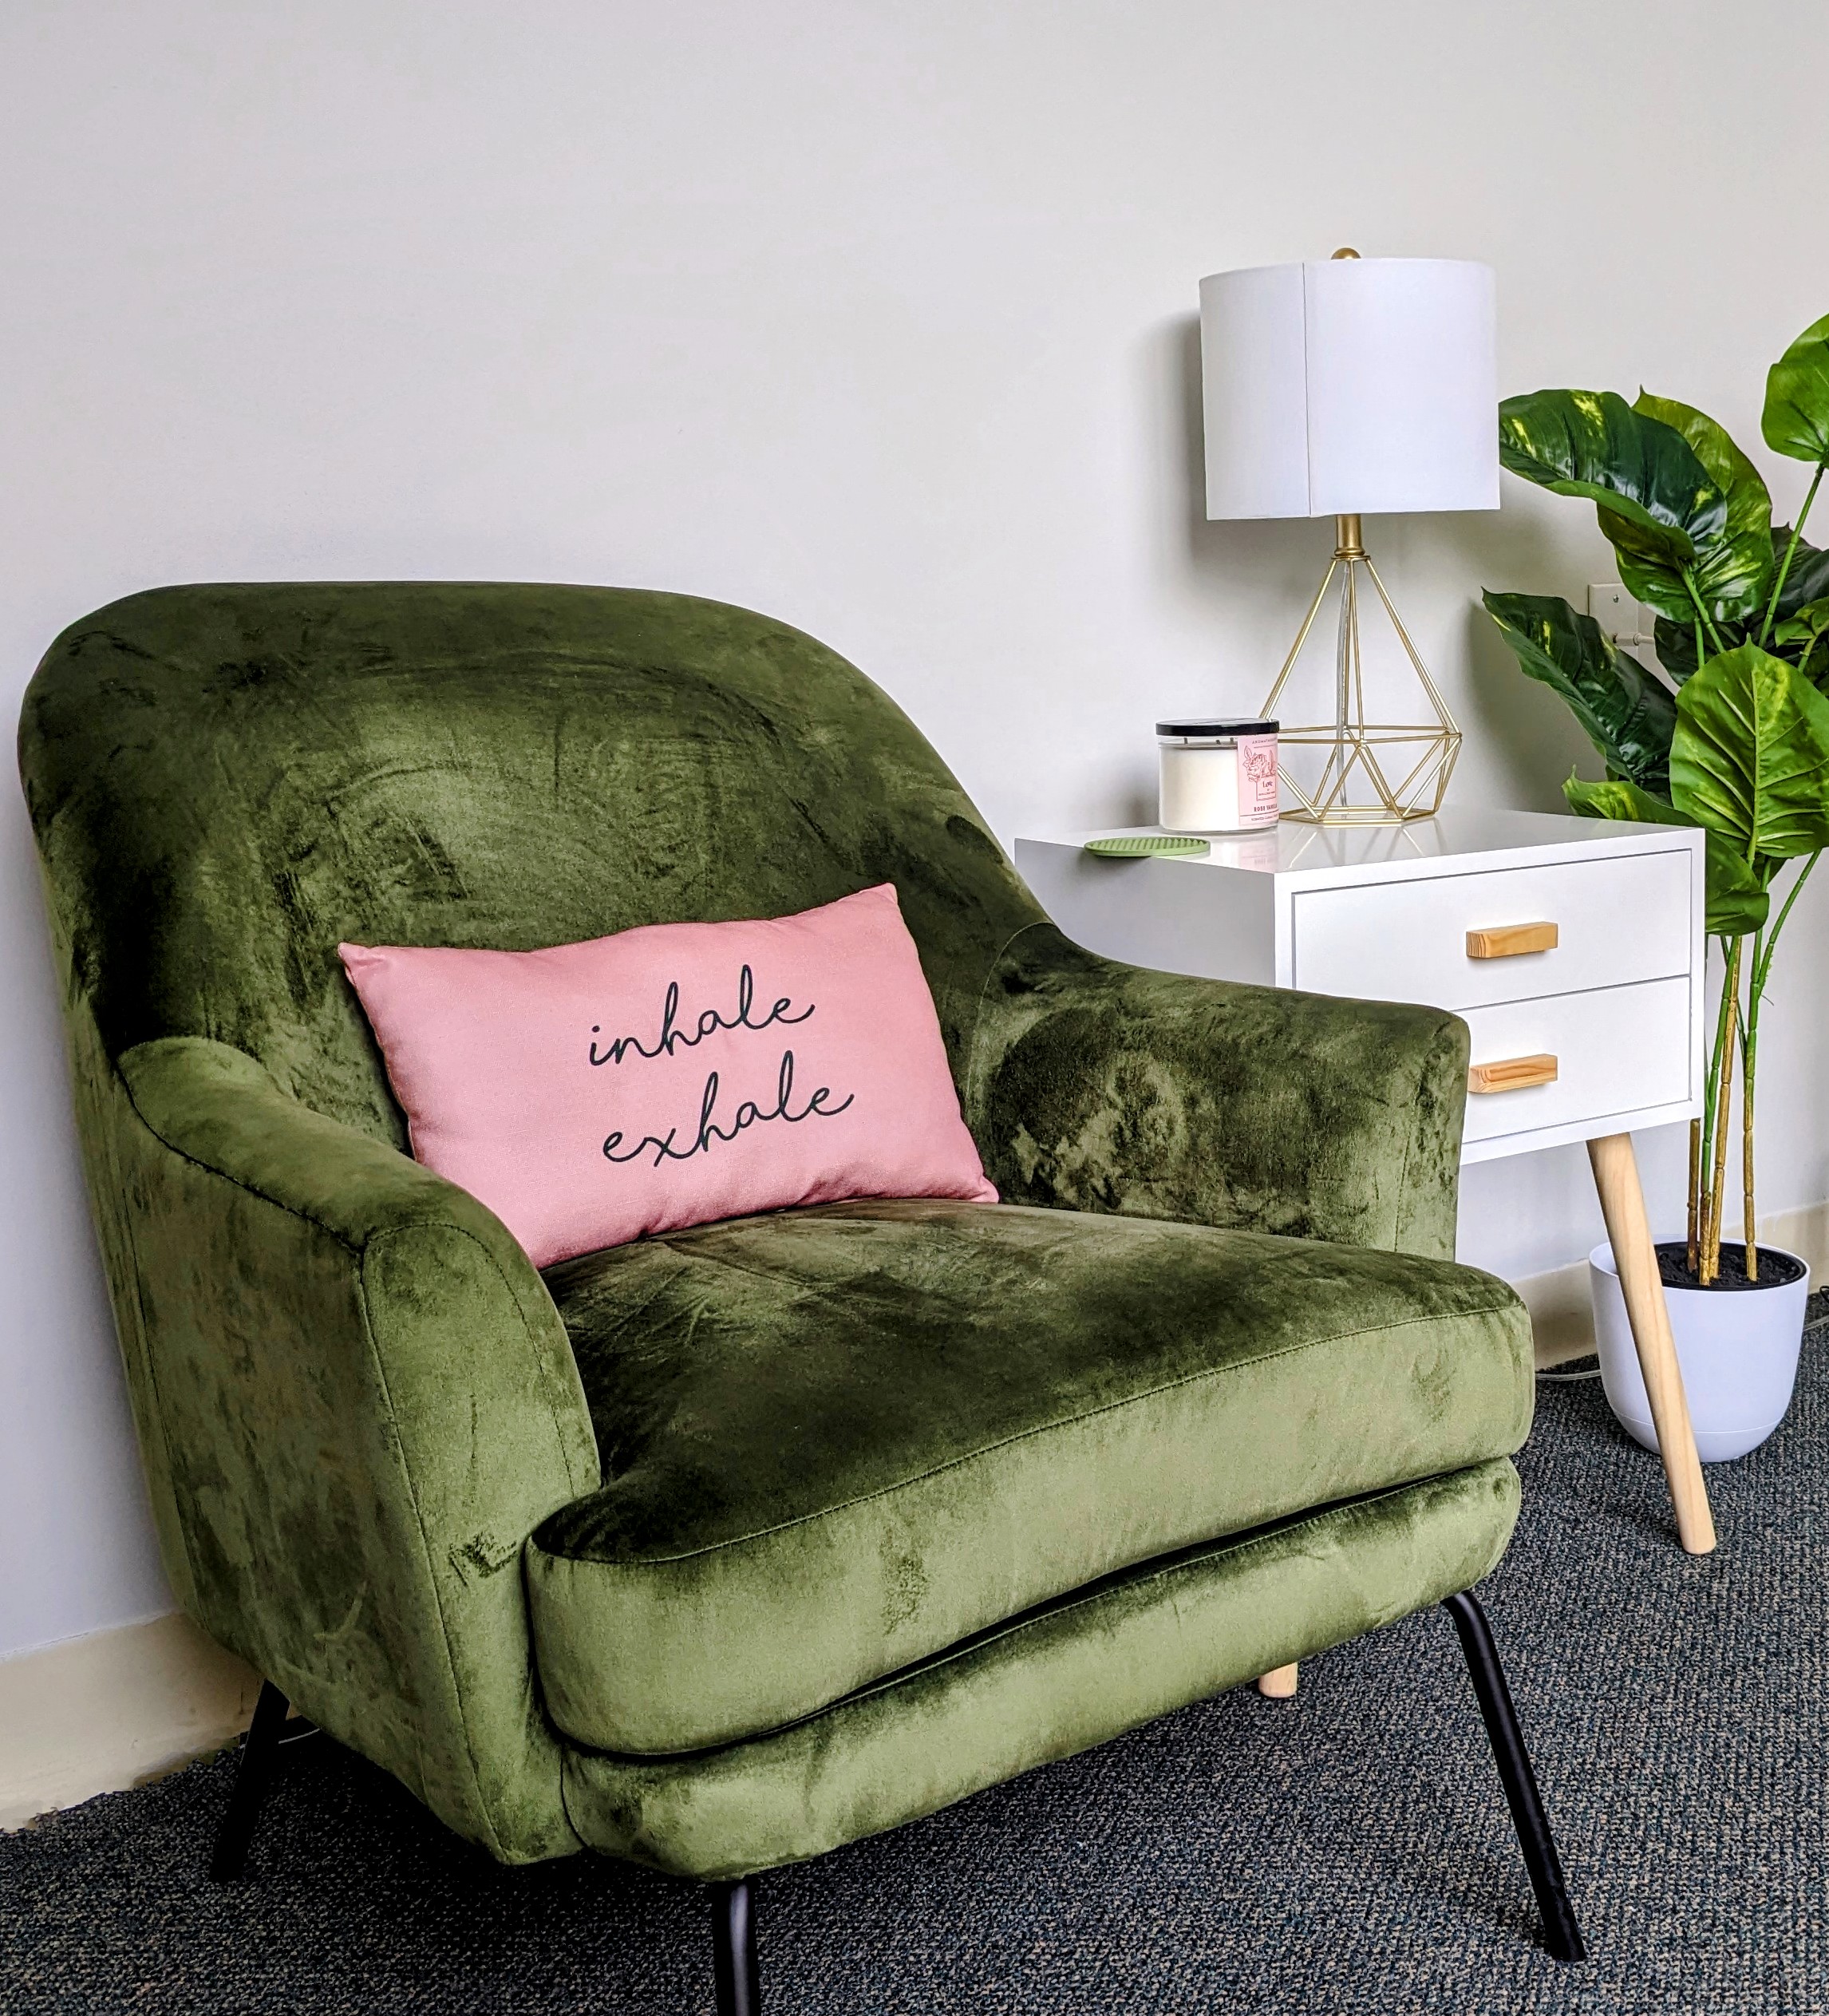 Office chair next to a side table and plant. Asking for help is hard. There's hope for you through Christian counseling in Raleigh, NC. Call Sojourner counseling today to begin working with a Christian counselor in Raleigh. 